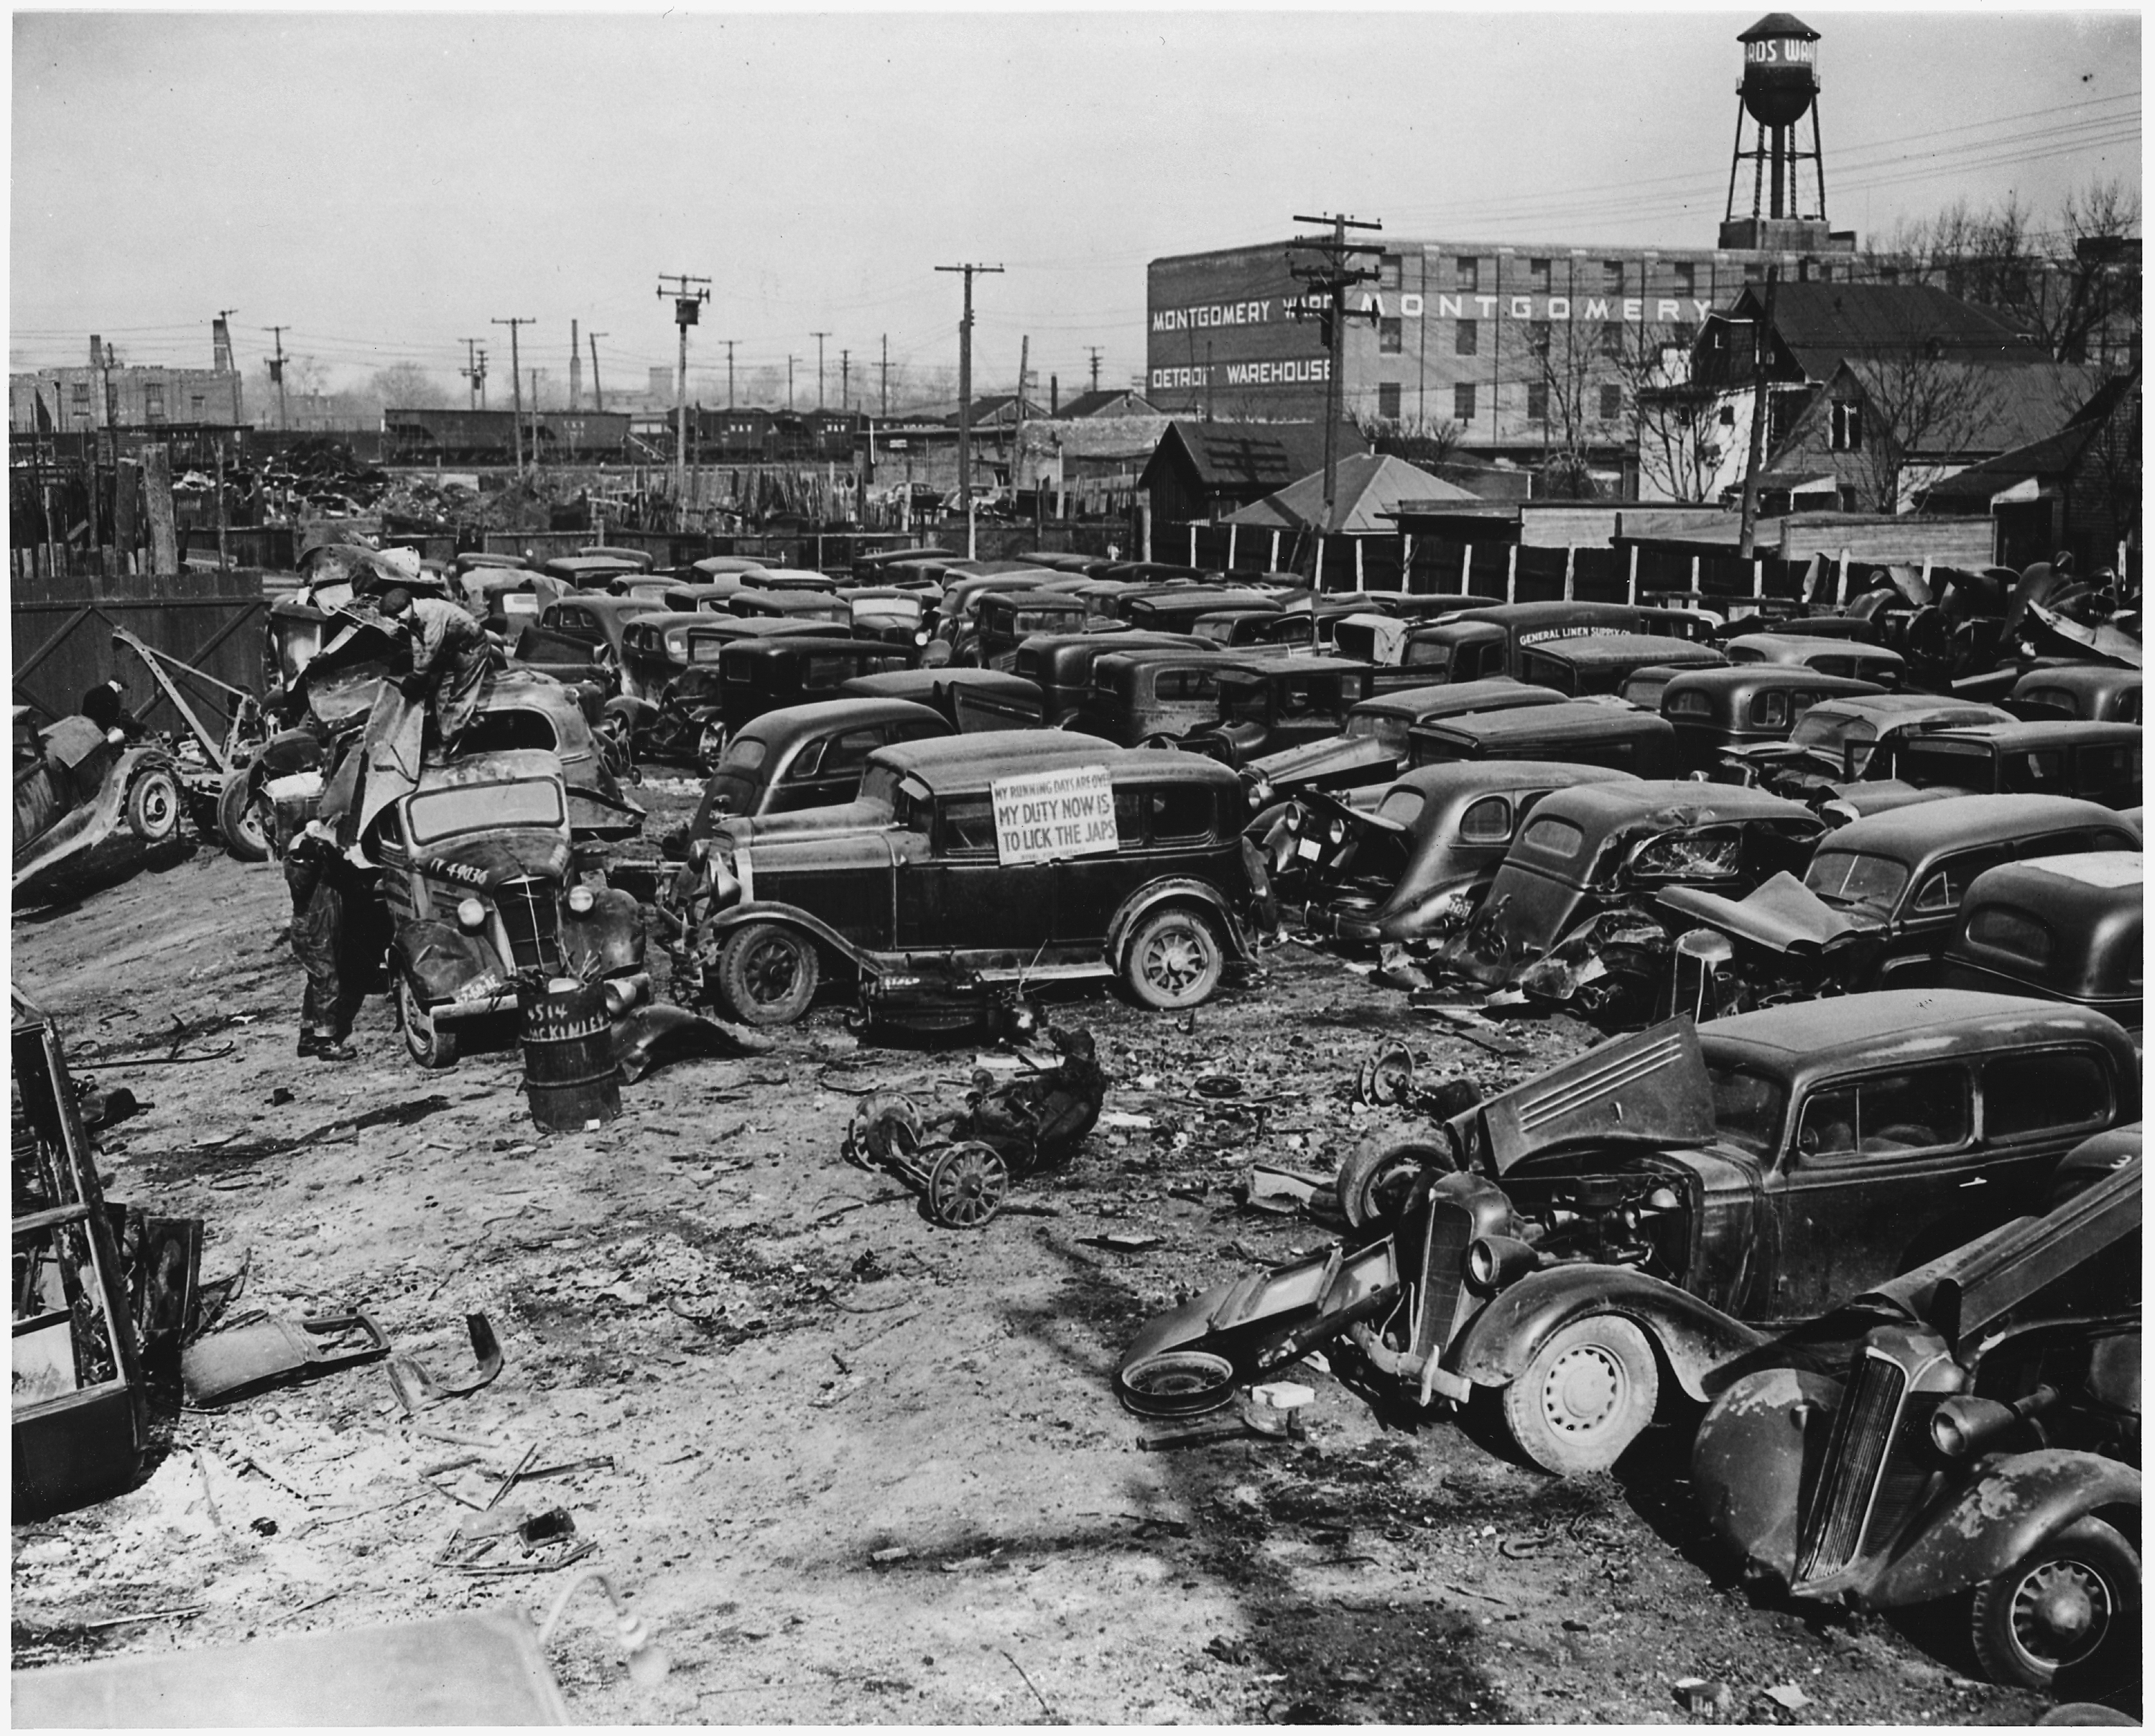 A Detroit Auto Graveyard - junked autos and trucks to be shipped to scrap yards and then to the Great Lakes Steel... - NARA - 196424